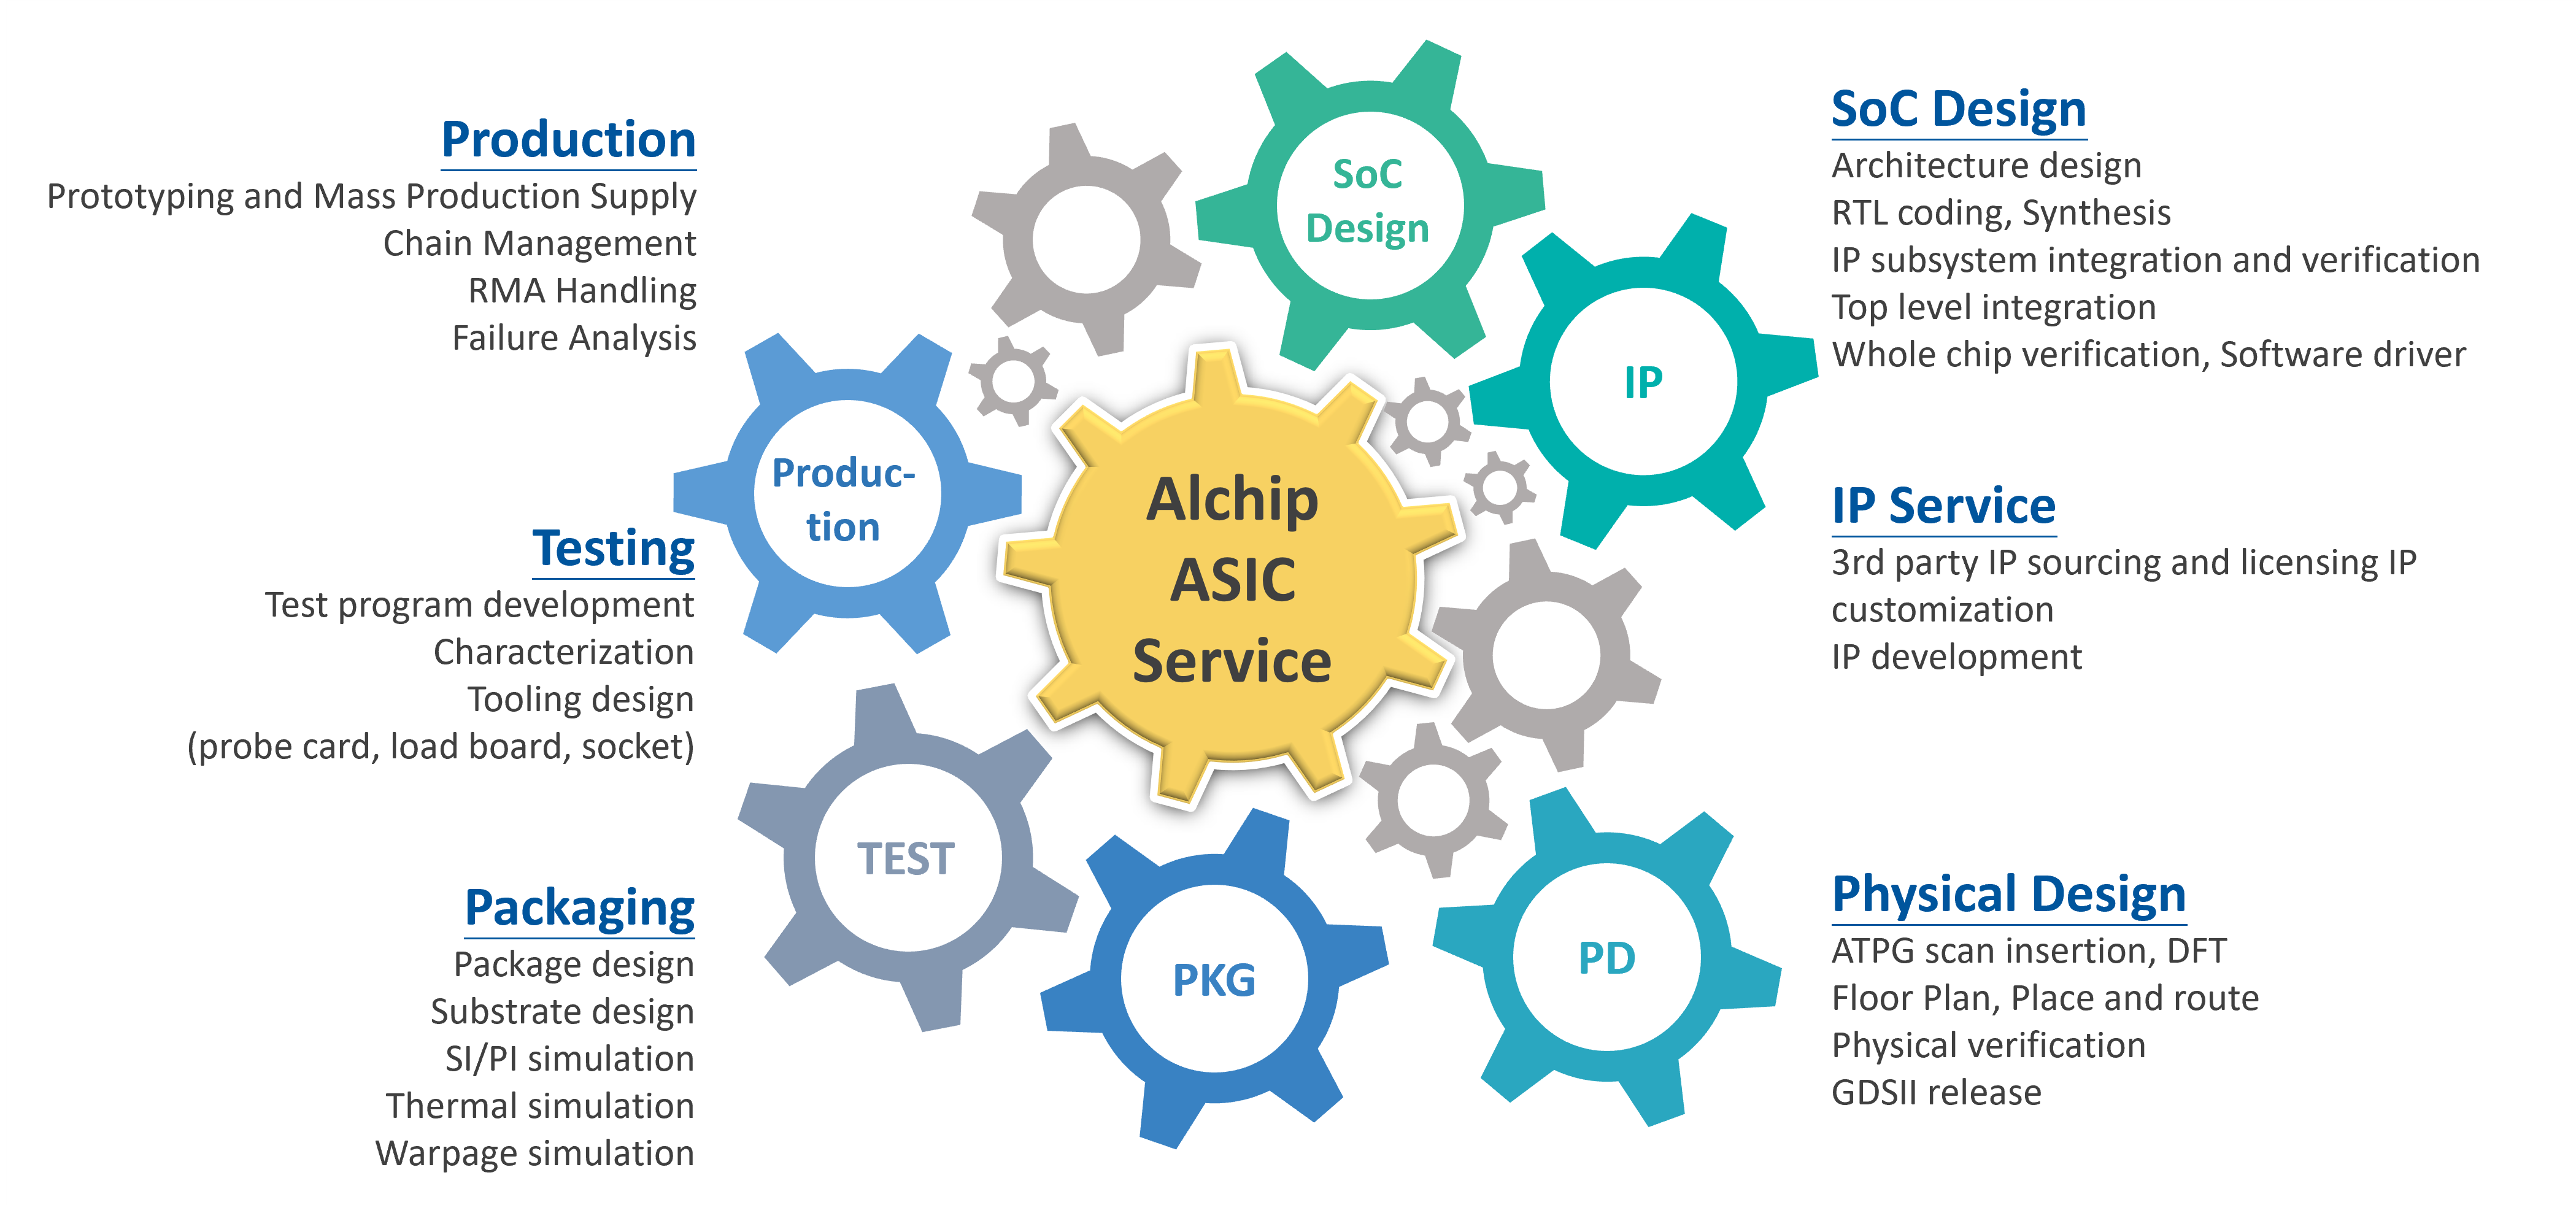 Alchip is the leading High-Performance ASIC leader with a full portfolio of services across the entire design, test, manufacturing, and package spectrum.